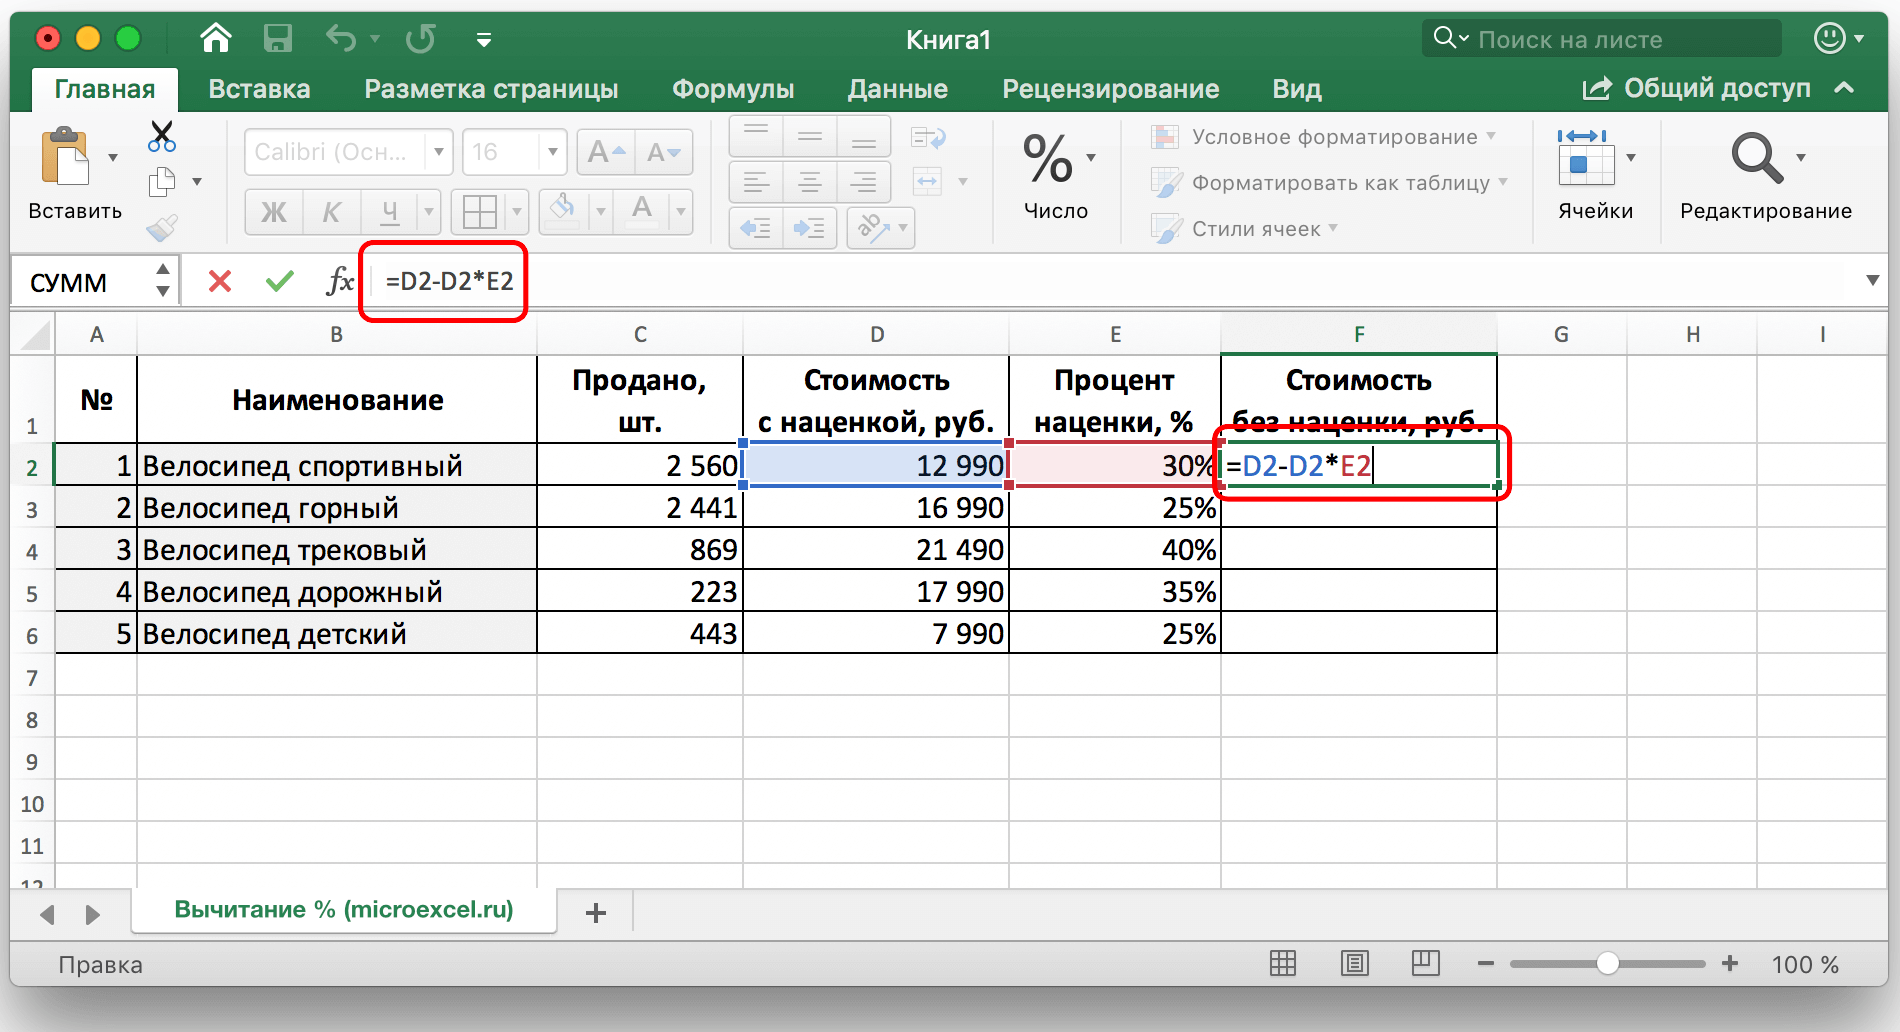 Lesson on subtracting percentages from a number in Excel